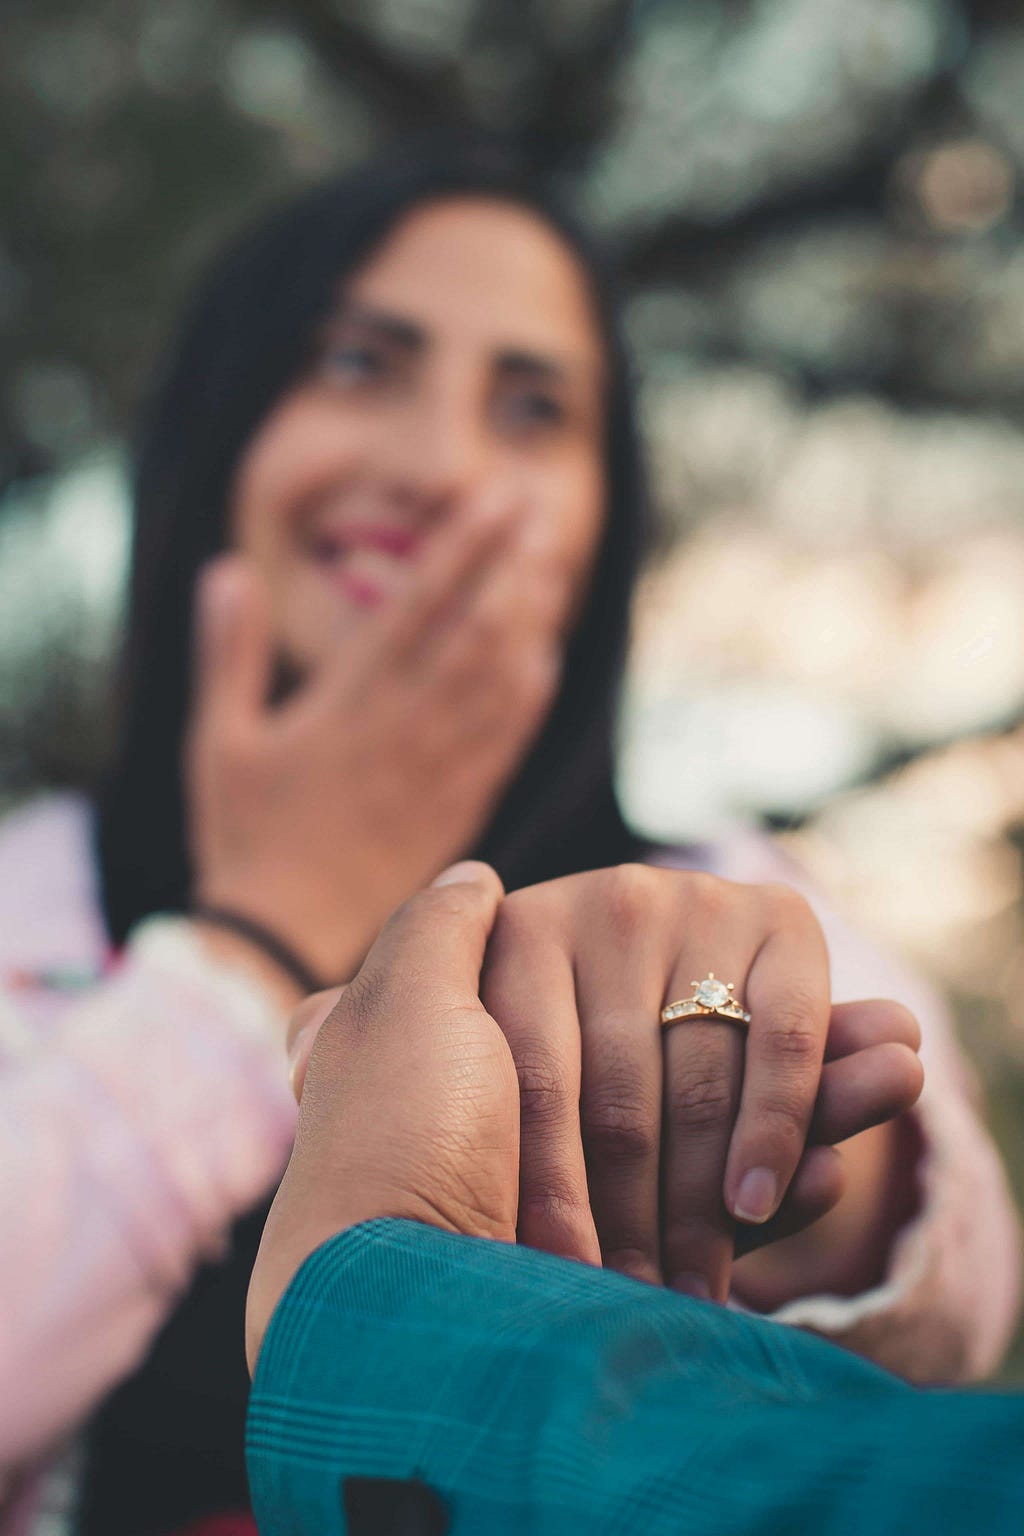 A close-up of a couple’s hands, with a focus on the woman’s hand showcasing an engagement ring. The background features the smiling, slightly blurred face of the woman, who has one hand covering her mouth in surprise or joy.